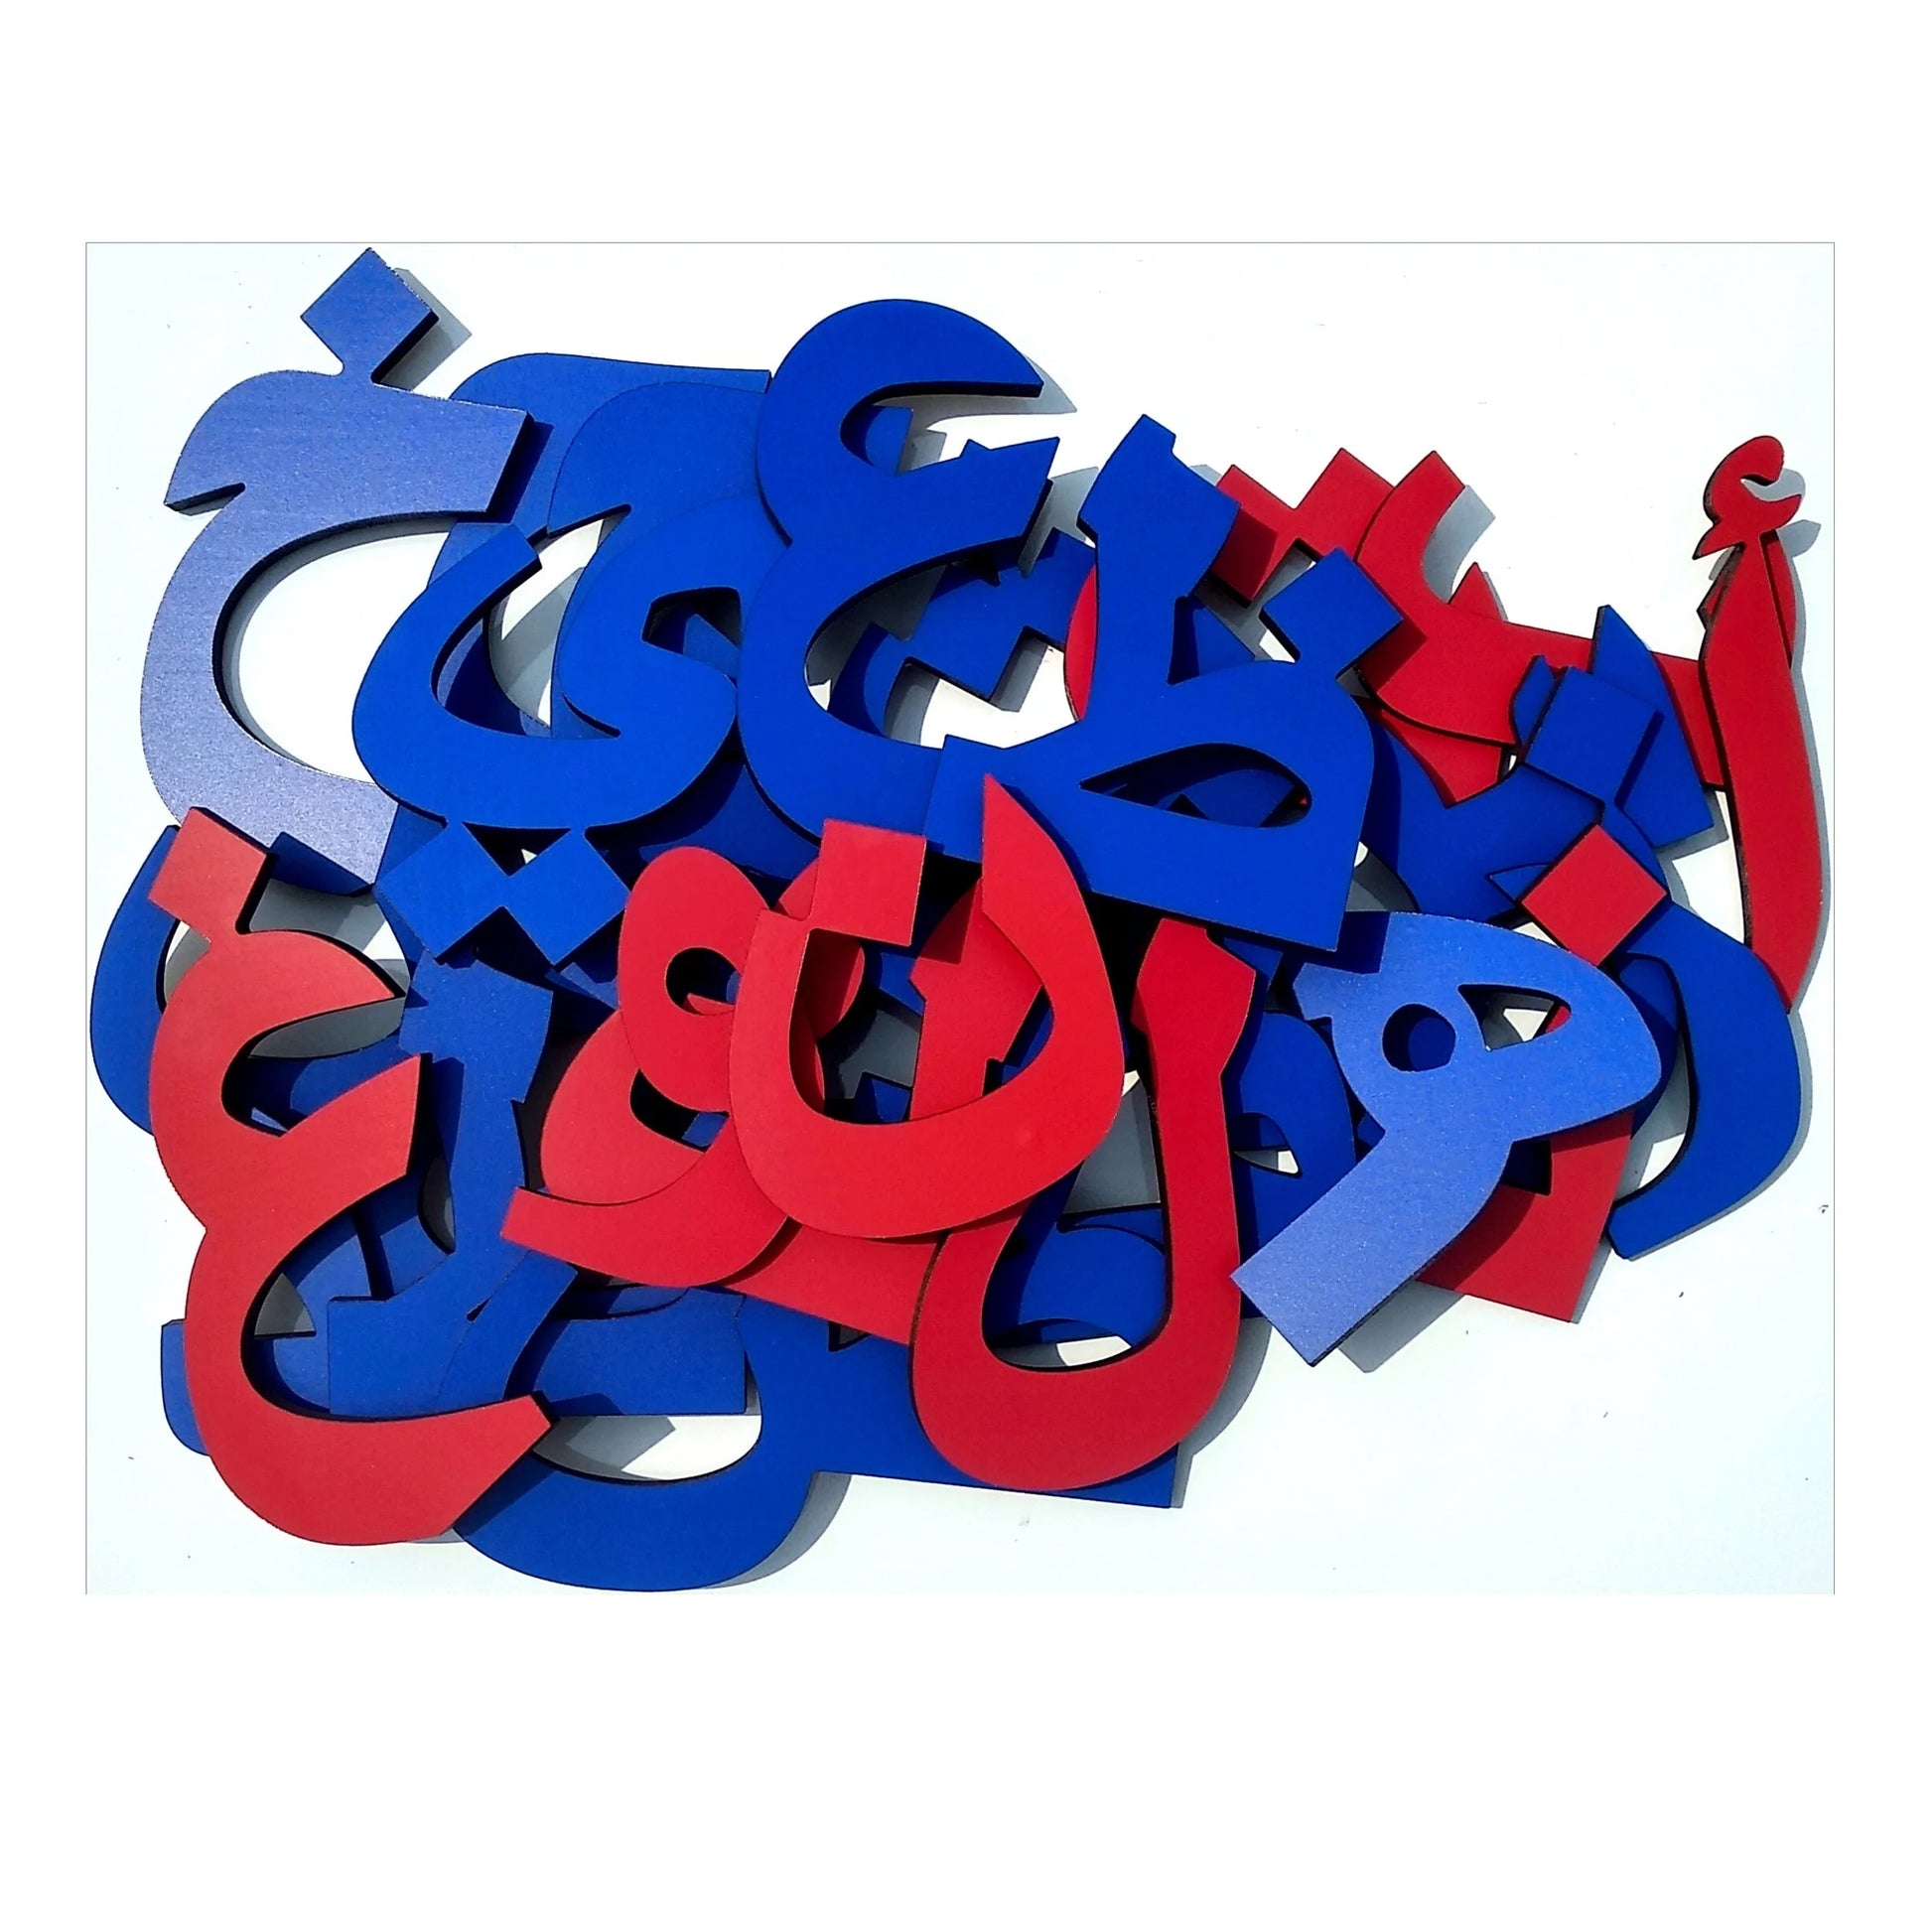 Buy Wooden Arabic Magnetic Letters - SkilloToys.com